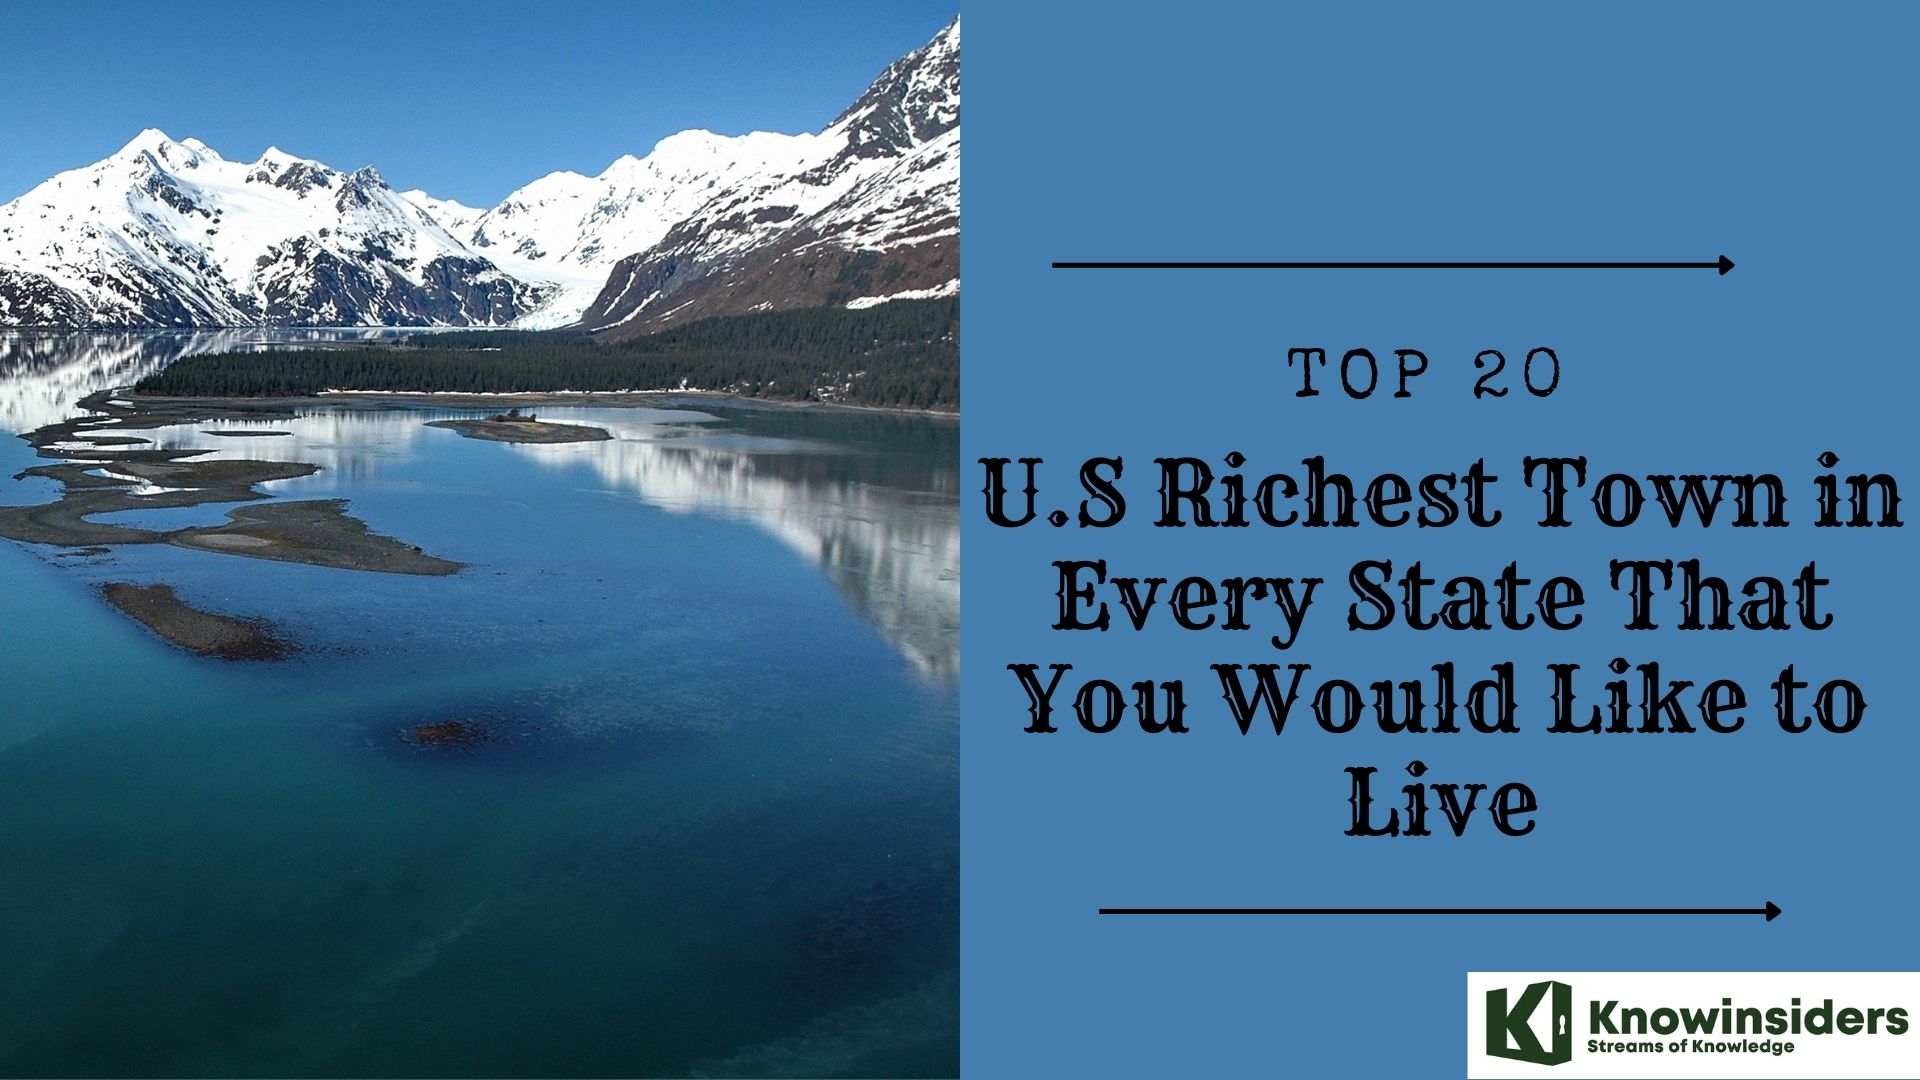 Top 20 U.S Richest Town in Every State That You Would Like to Live